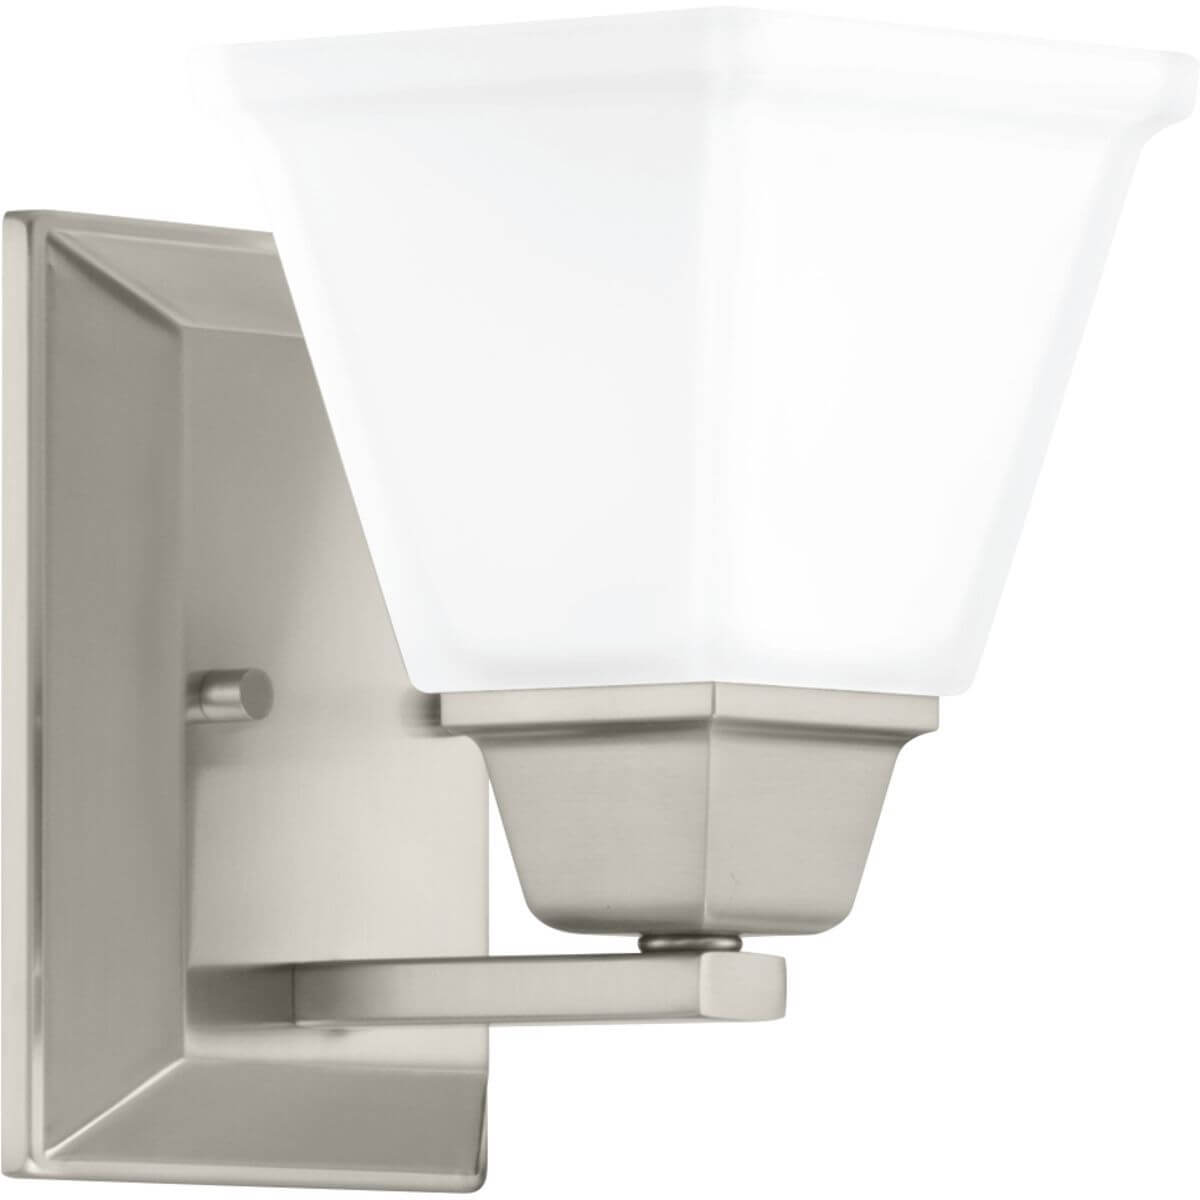 Progress Lighting Clifton Heights 1 Light 7 inch Bath Vanity Light in Brushed Nickel with Etched Glass P300158-009